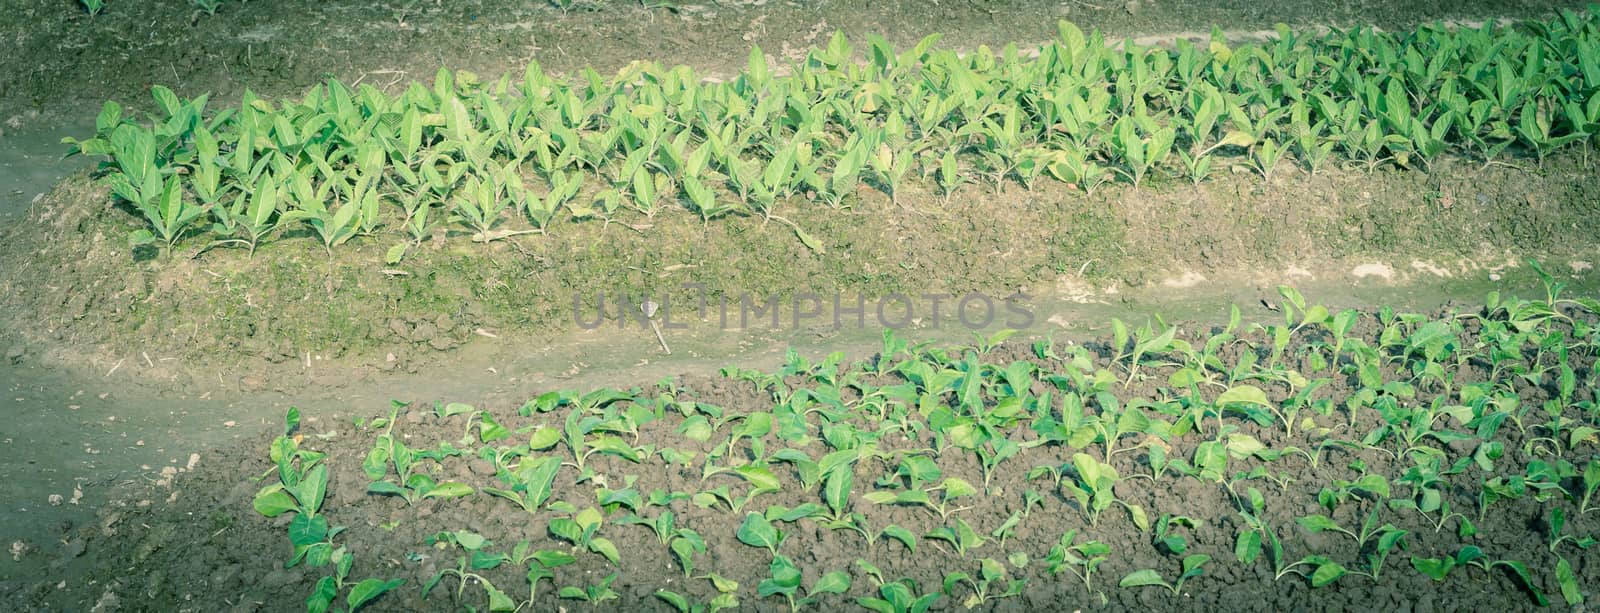 Panorama view row of young makhorka (Nicotiana rustica, Aztec tobacco) cultivated in rural farm Vietnam. Traditional way of growing strong tobacco plants, a rainforest plant in the family Solanaceae